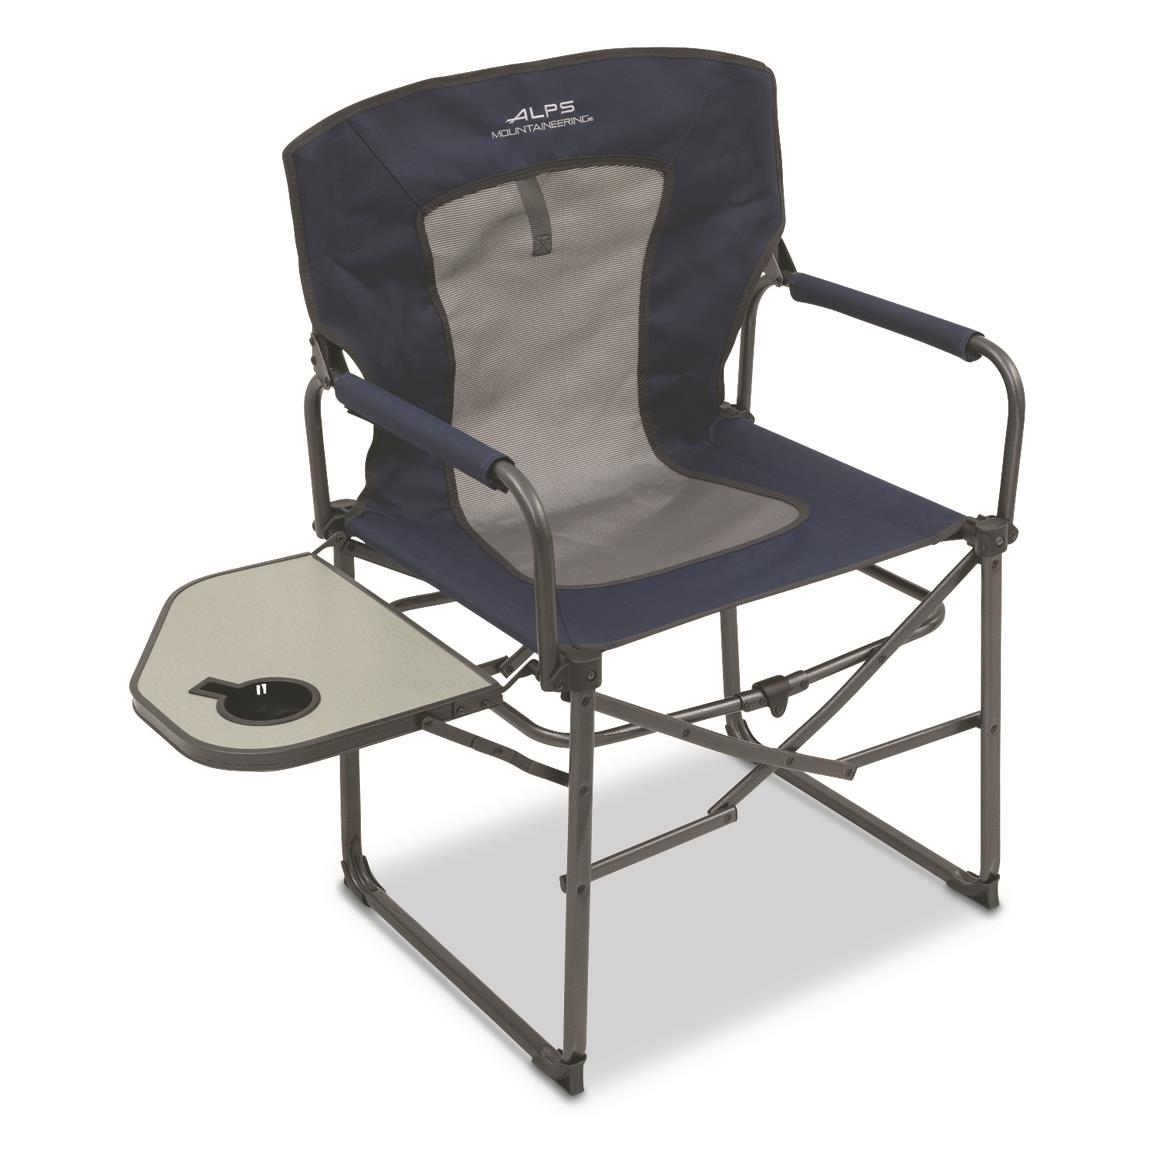 ALPS Mountaineering Campside Camp Chair, Navy